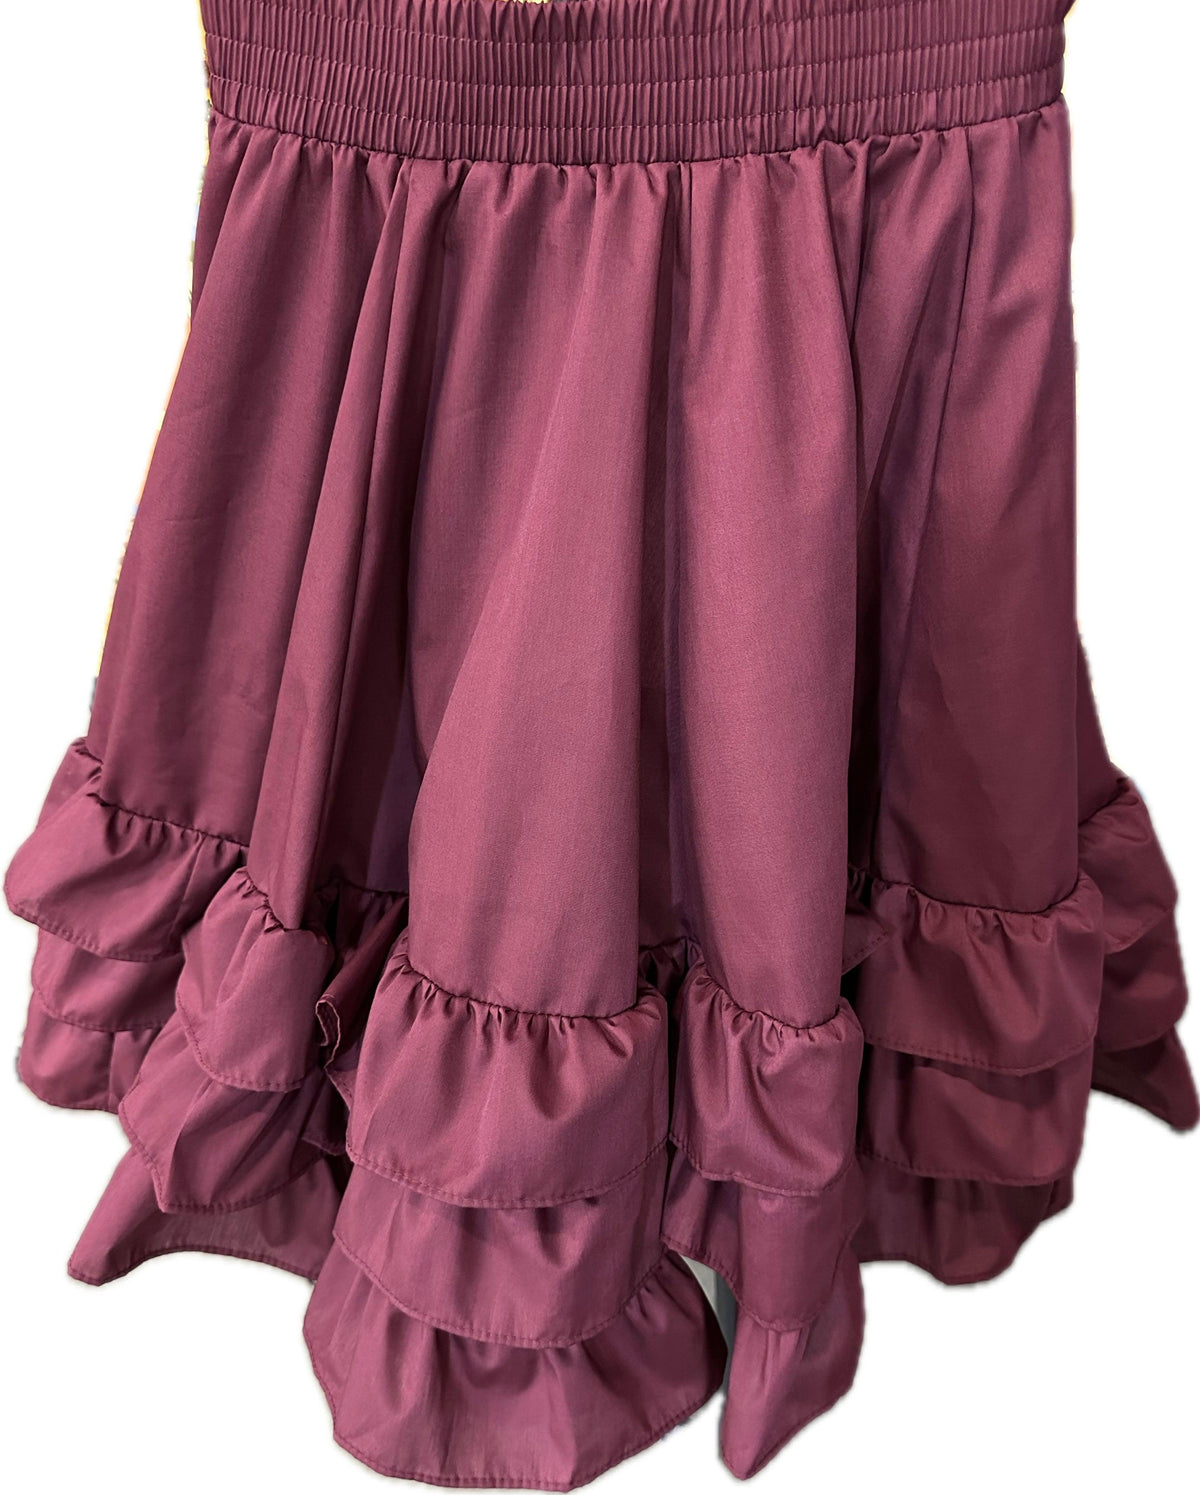 A 3 Ruffle Square Dance Skirt from Square Up Fashions, available in custom sizes.